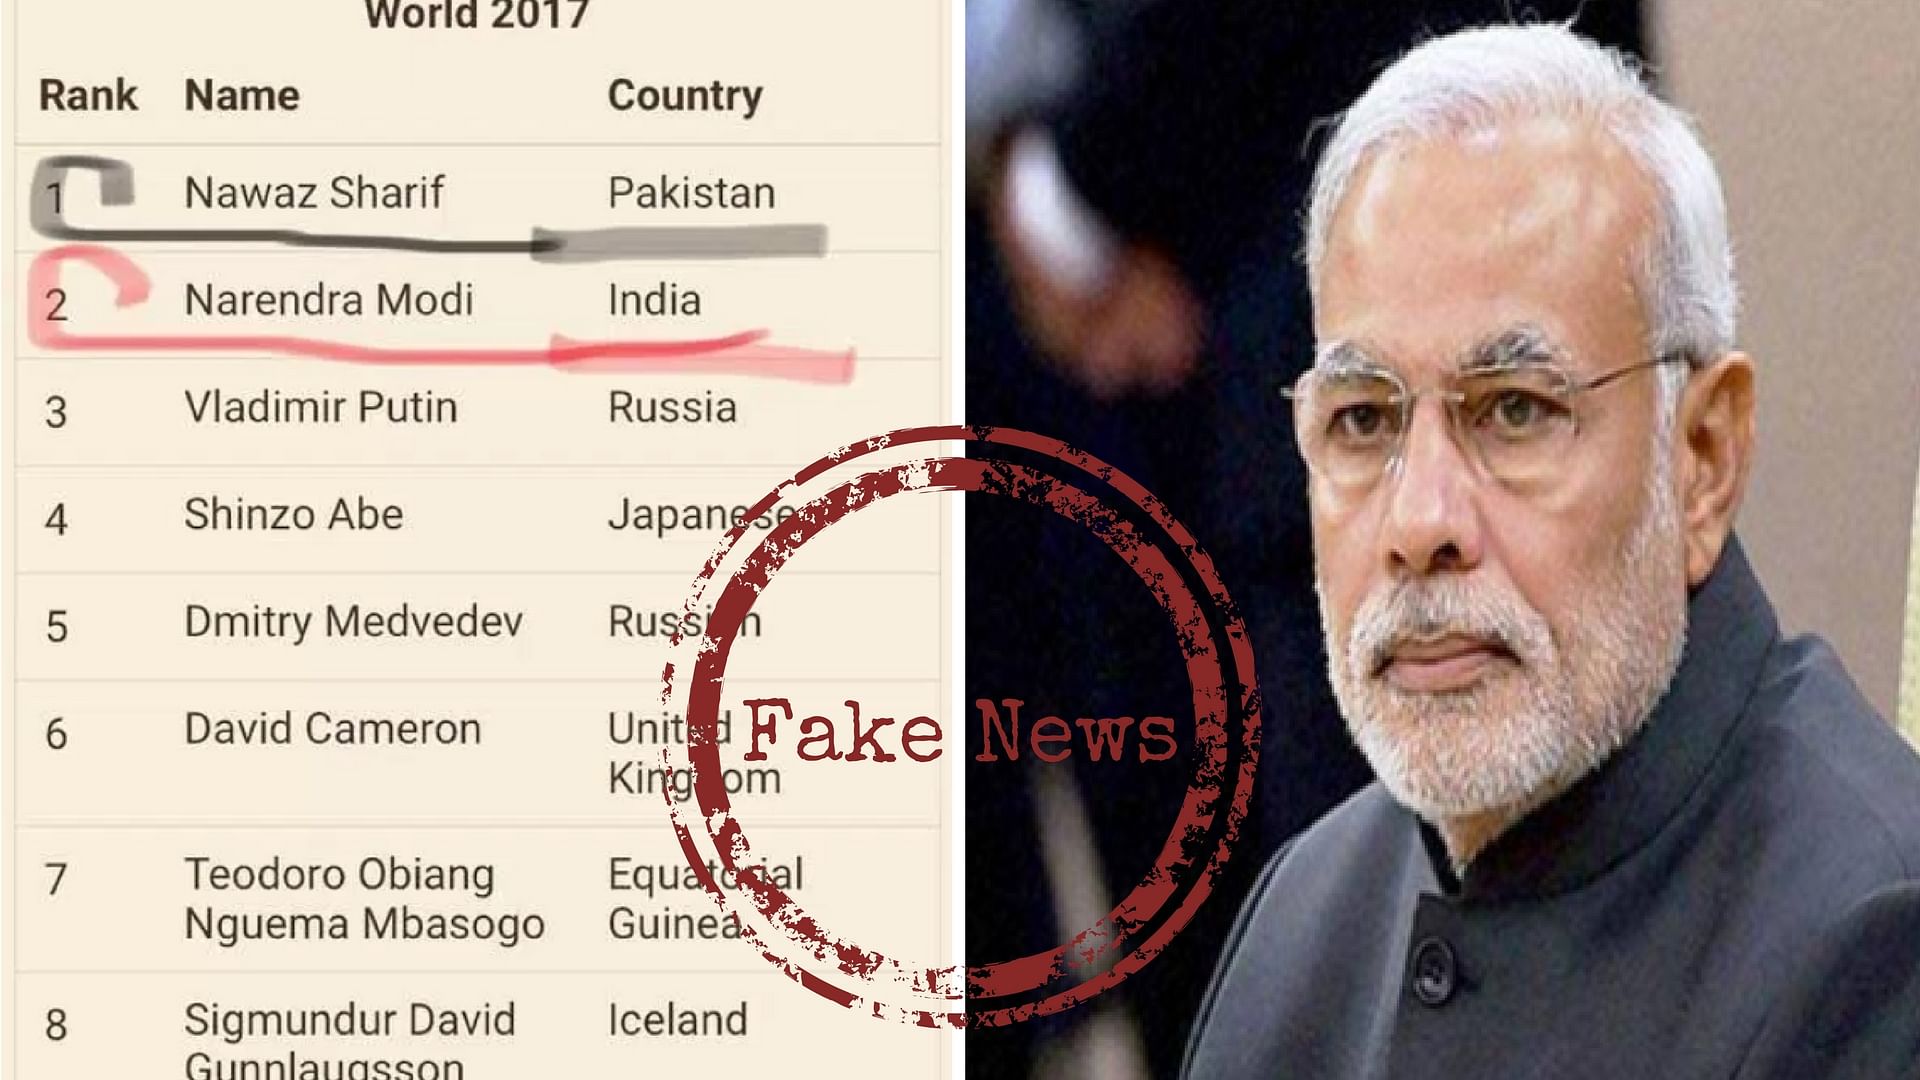 Prime Minister Narendra Modi ranks second among the most corrupt Prime Ministers in the world